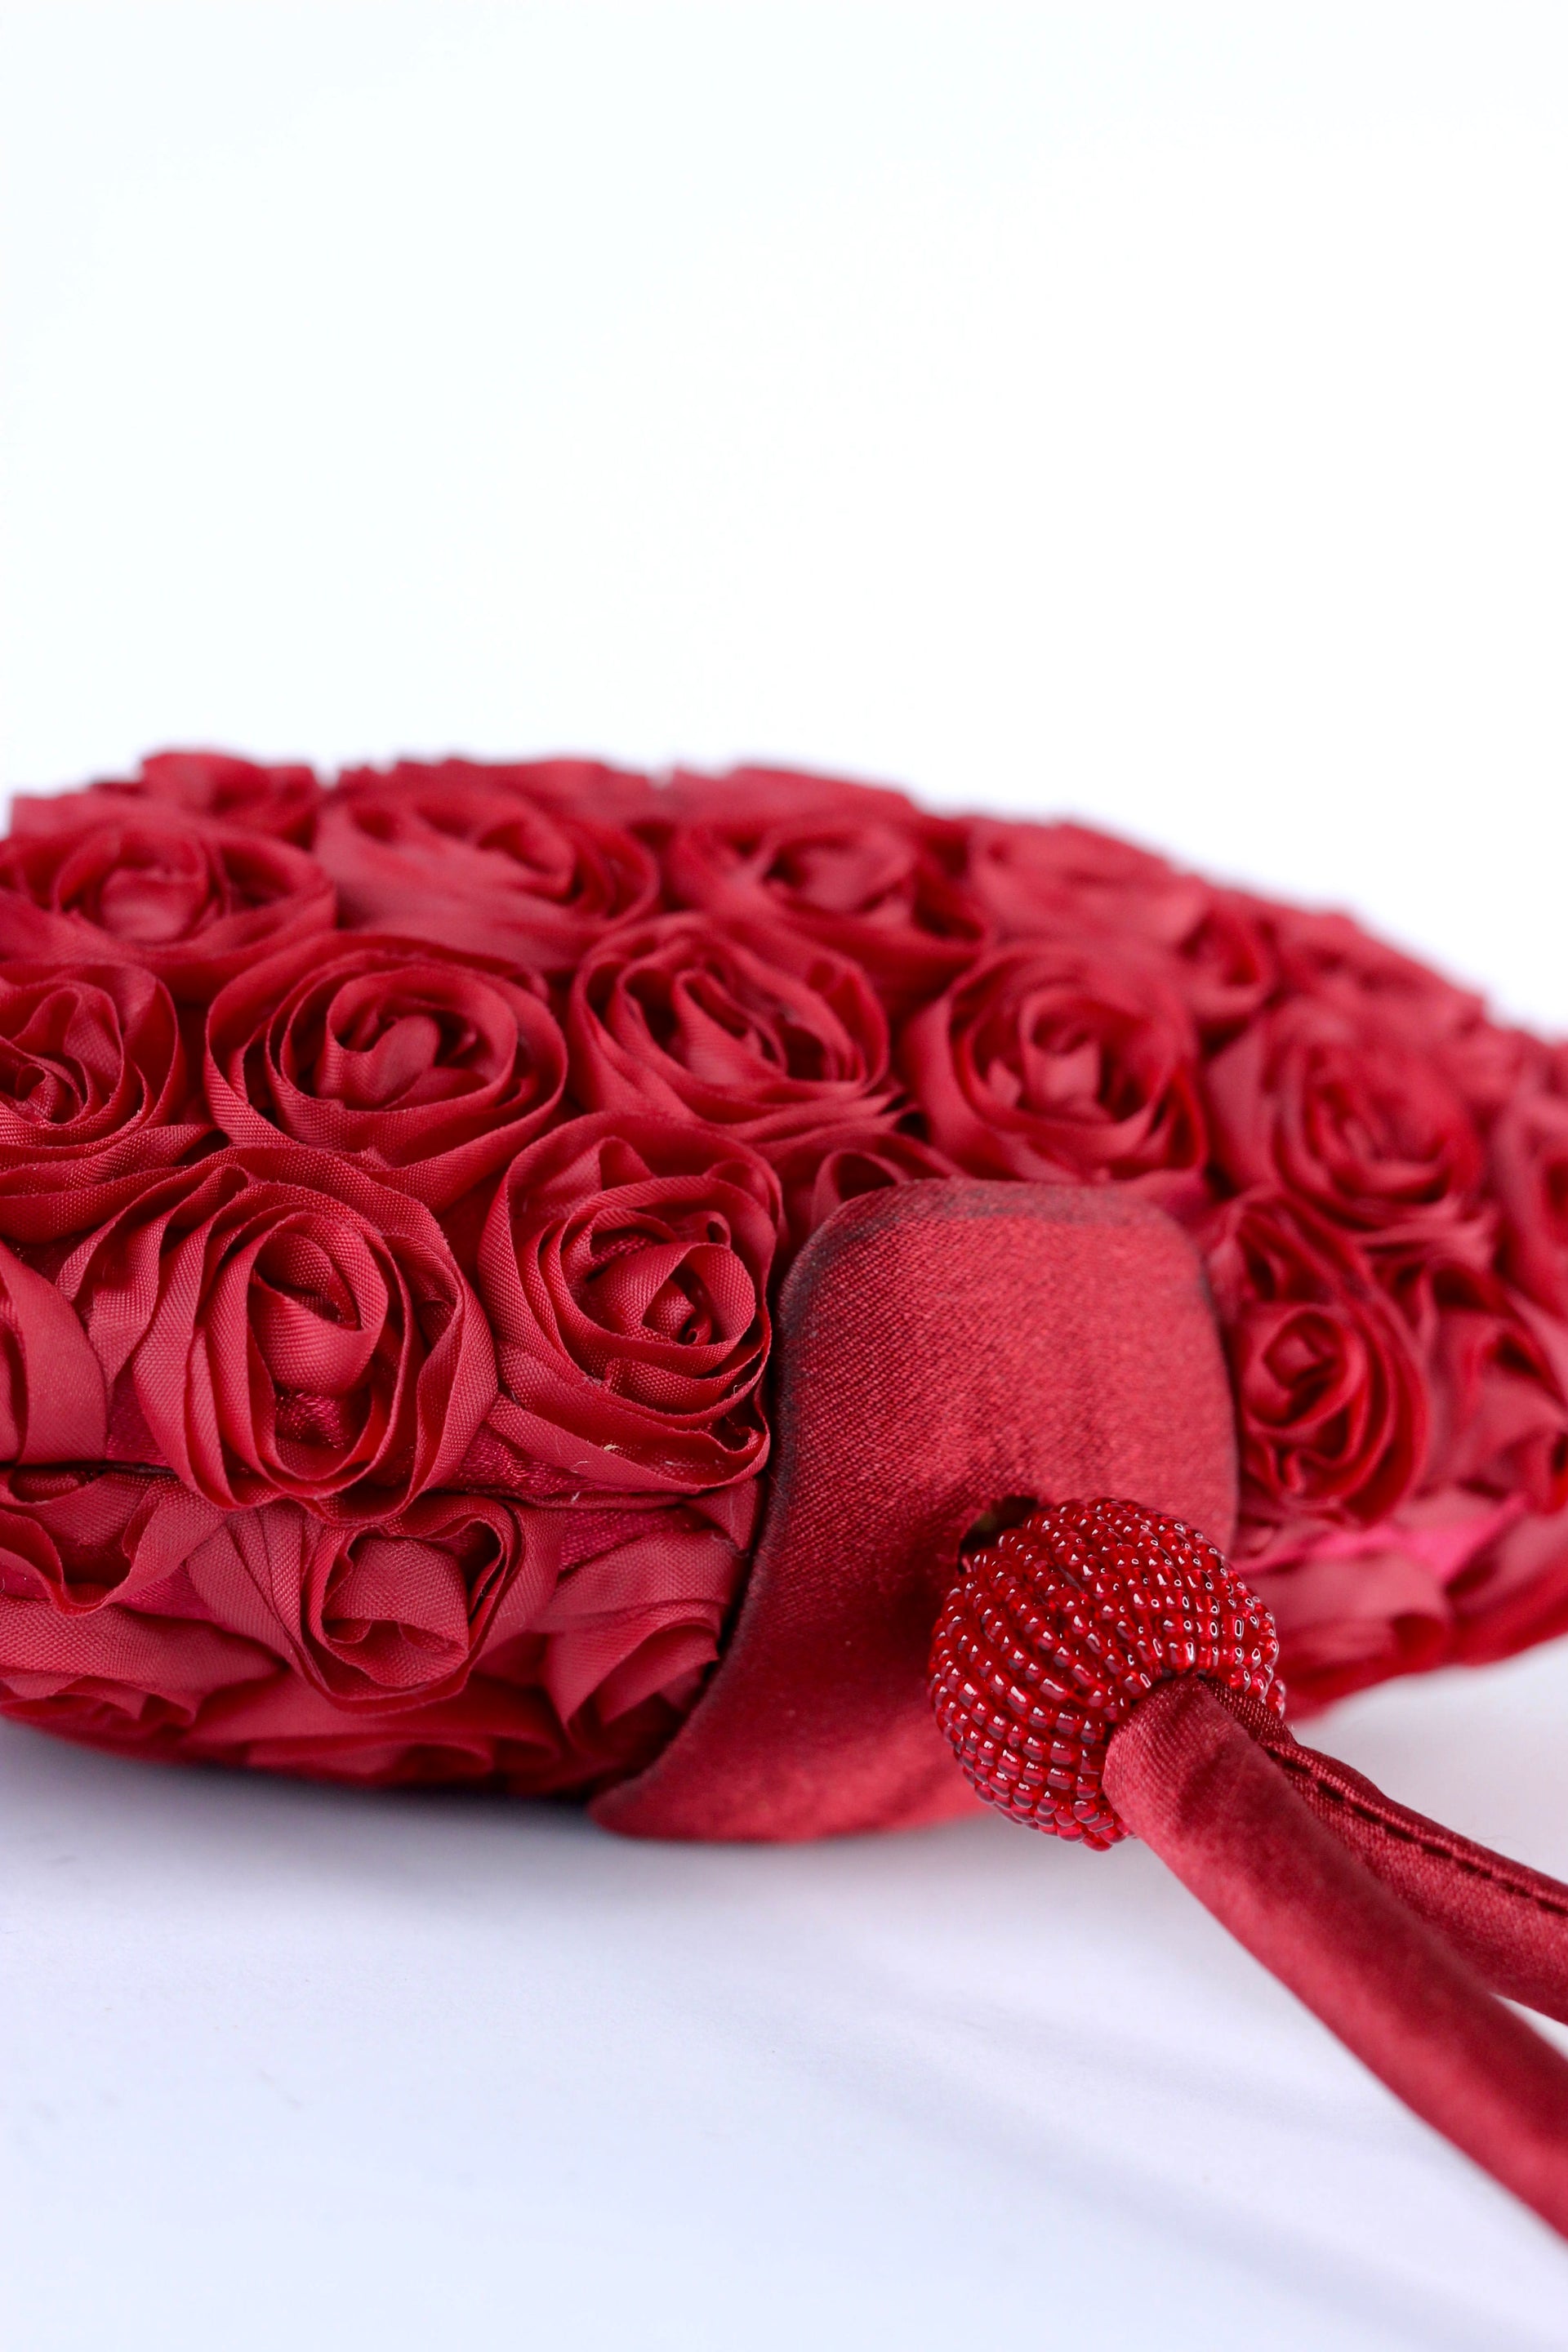 Vintage Red Satin Clutch Bag with 3D Roses and Beads